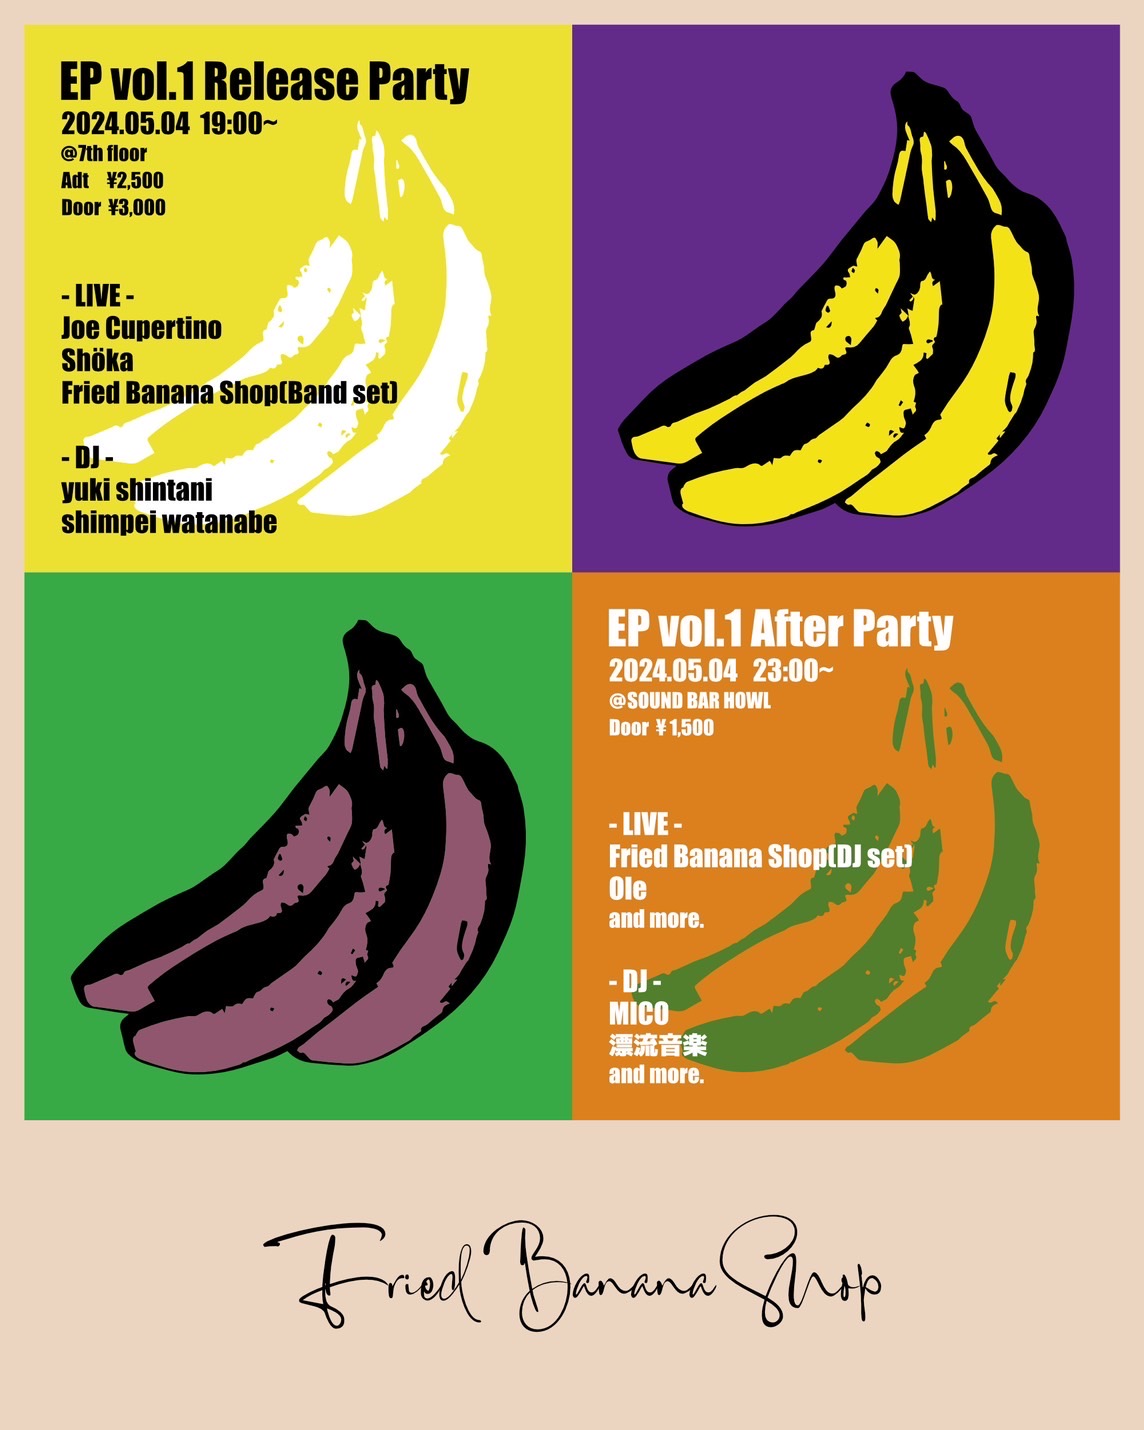 Fried Banana Shop EP vol.1 Release Party